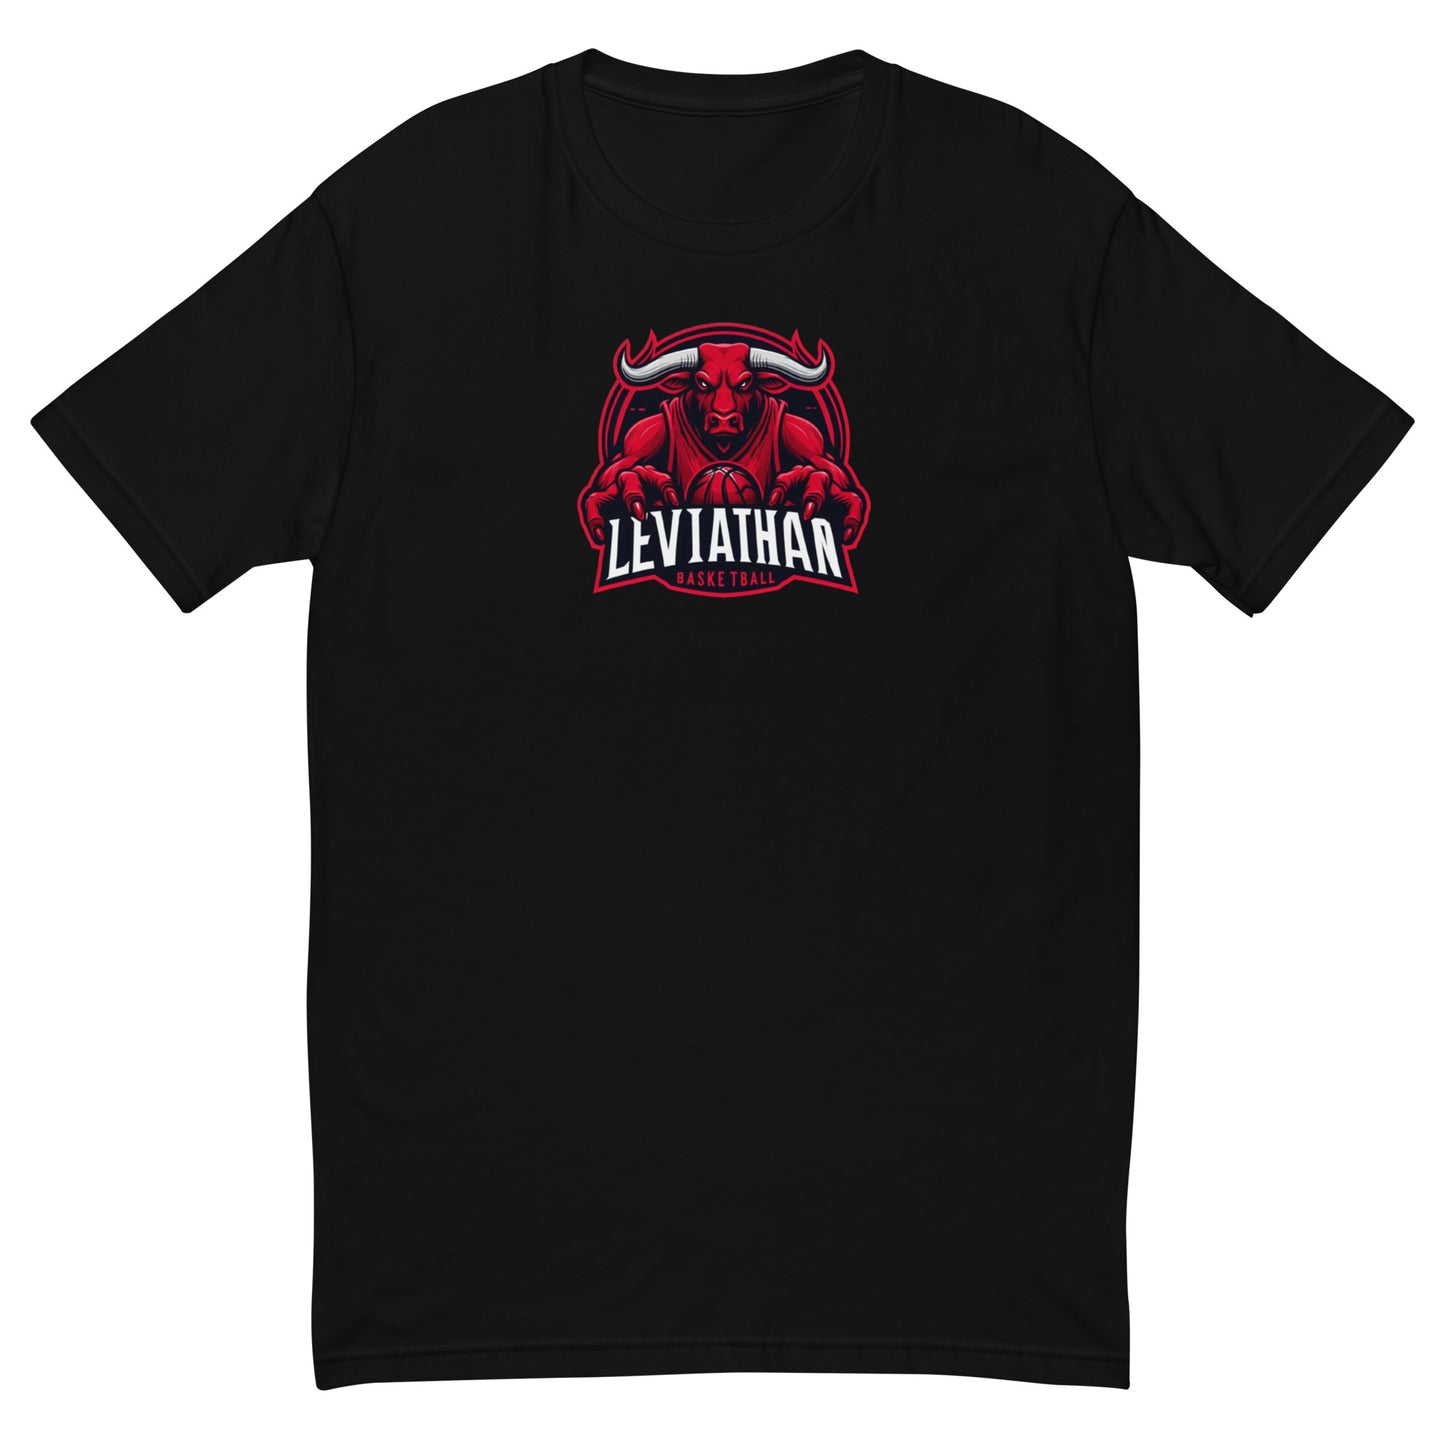 "Red Leviathan" Tee